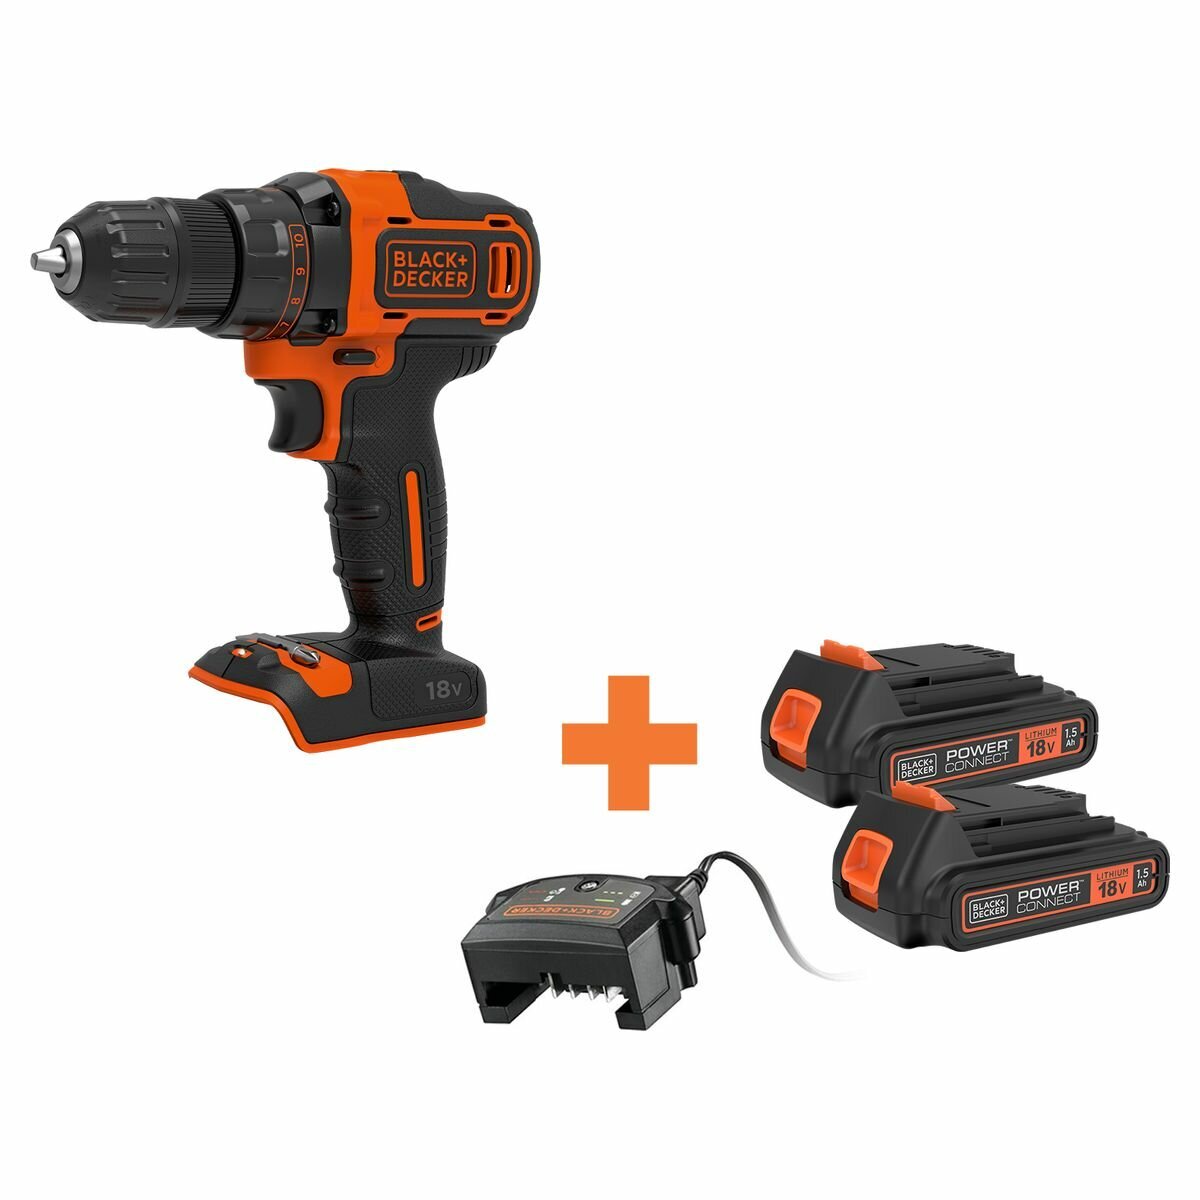 Black  Decker BDCDD186B-XE Two Speed Drill Driver with Two Batteries  Appliances Online